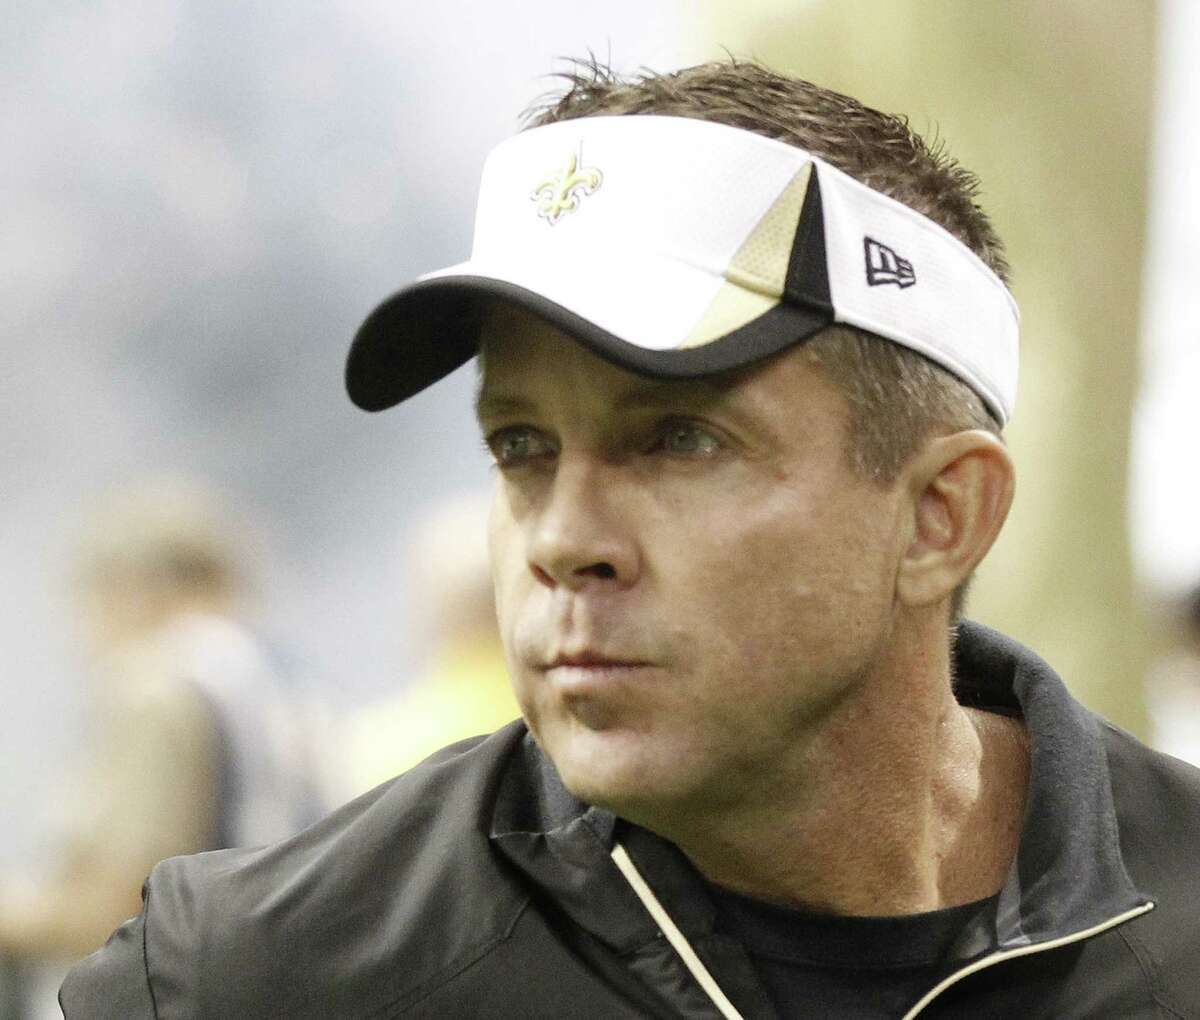 Head Coach Sean Payton of the New Orleans Saints is sown during an NFL game against the Dallas Cowboys at the Mercedes-Benz Superdome in New Orleans on Sunday, Nov. 10, 2013. (Ron T. Ennis/Fort Worth Star-Telegram/MCT)